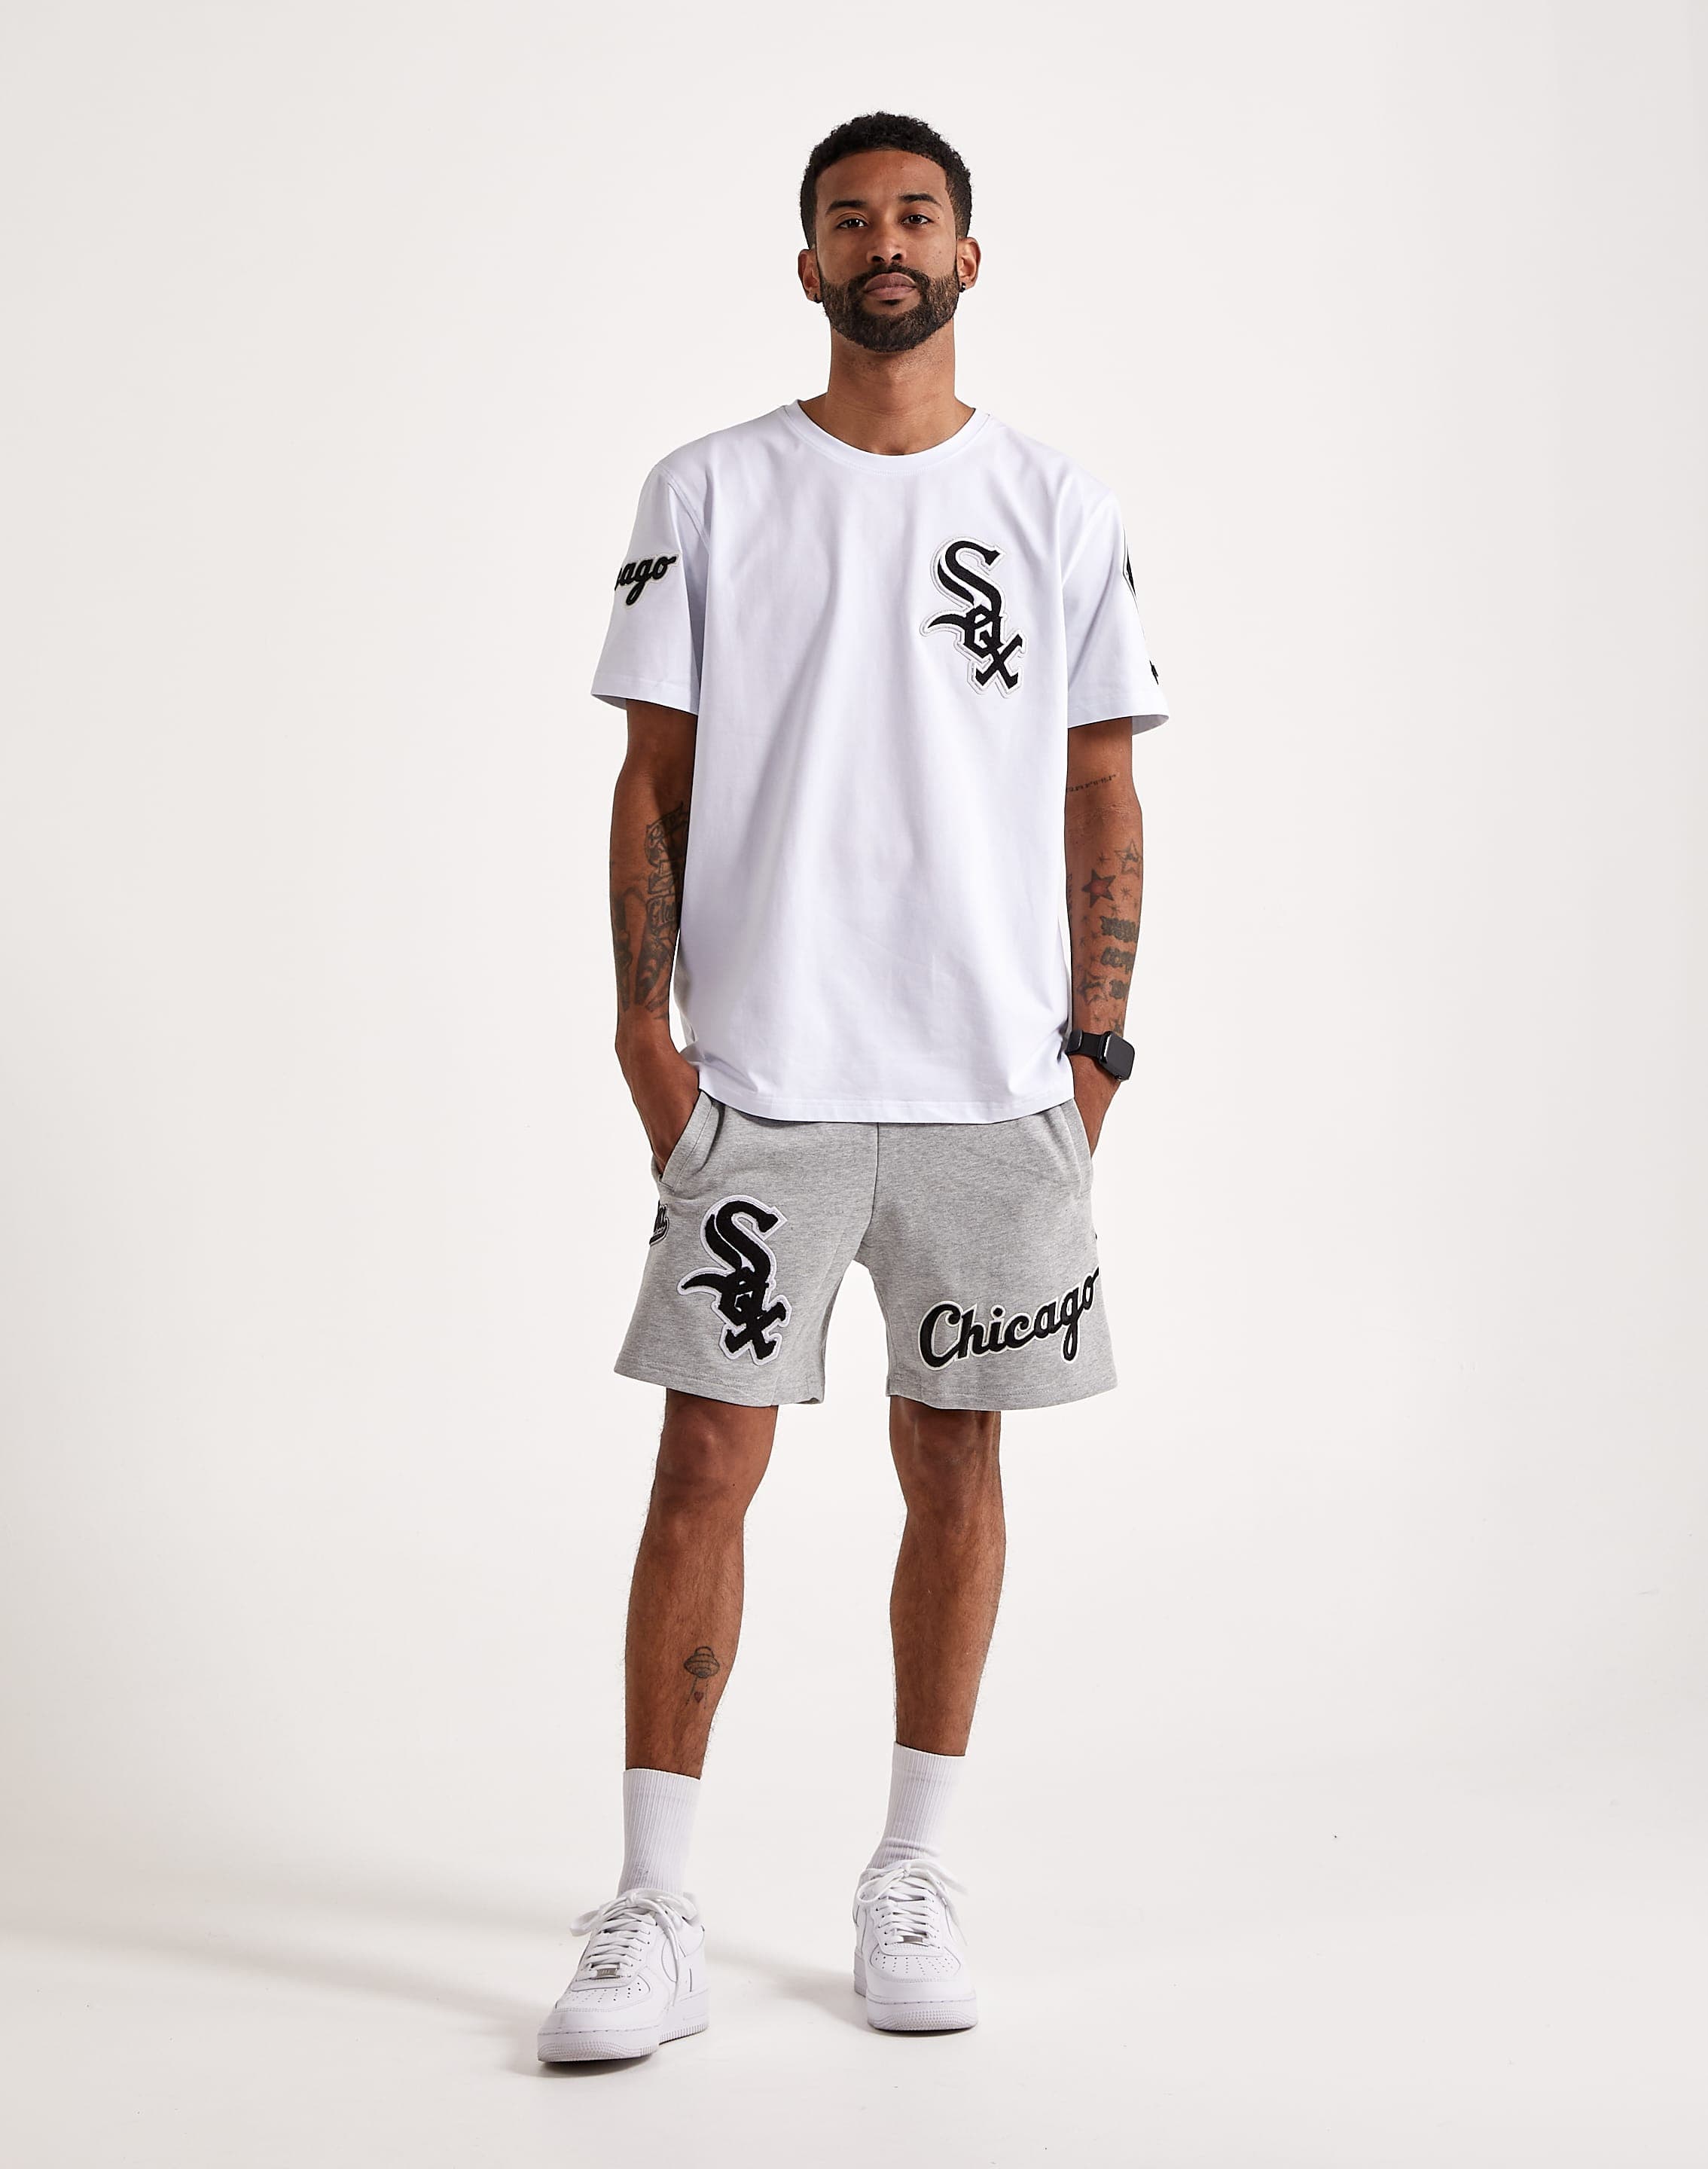 Chicago White Sox Edition Crosstown Series Shorts by JFG for